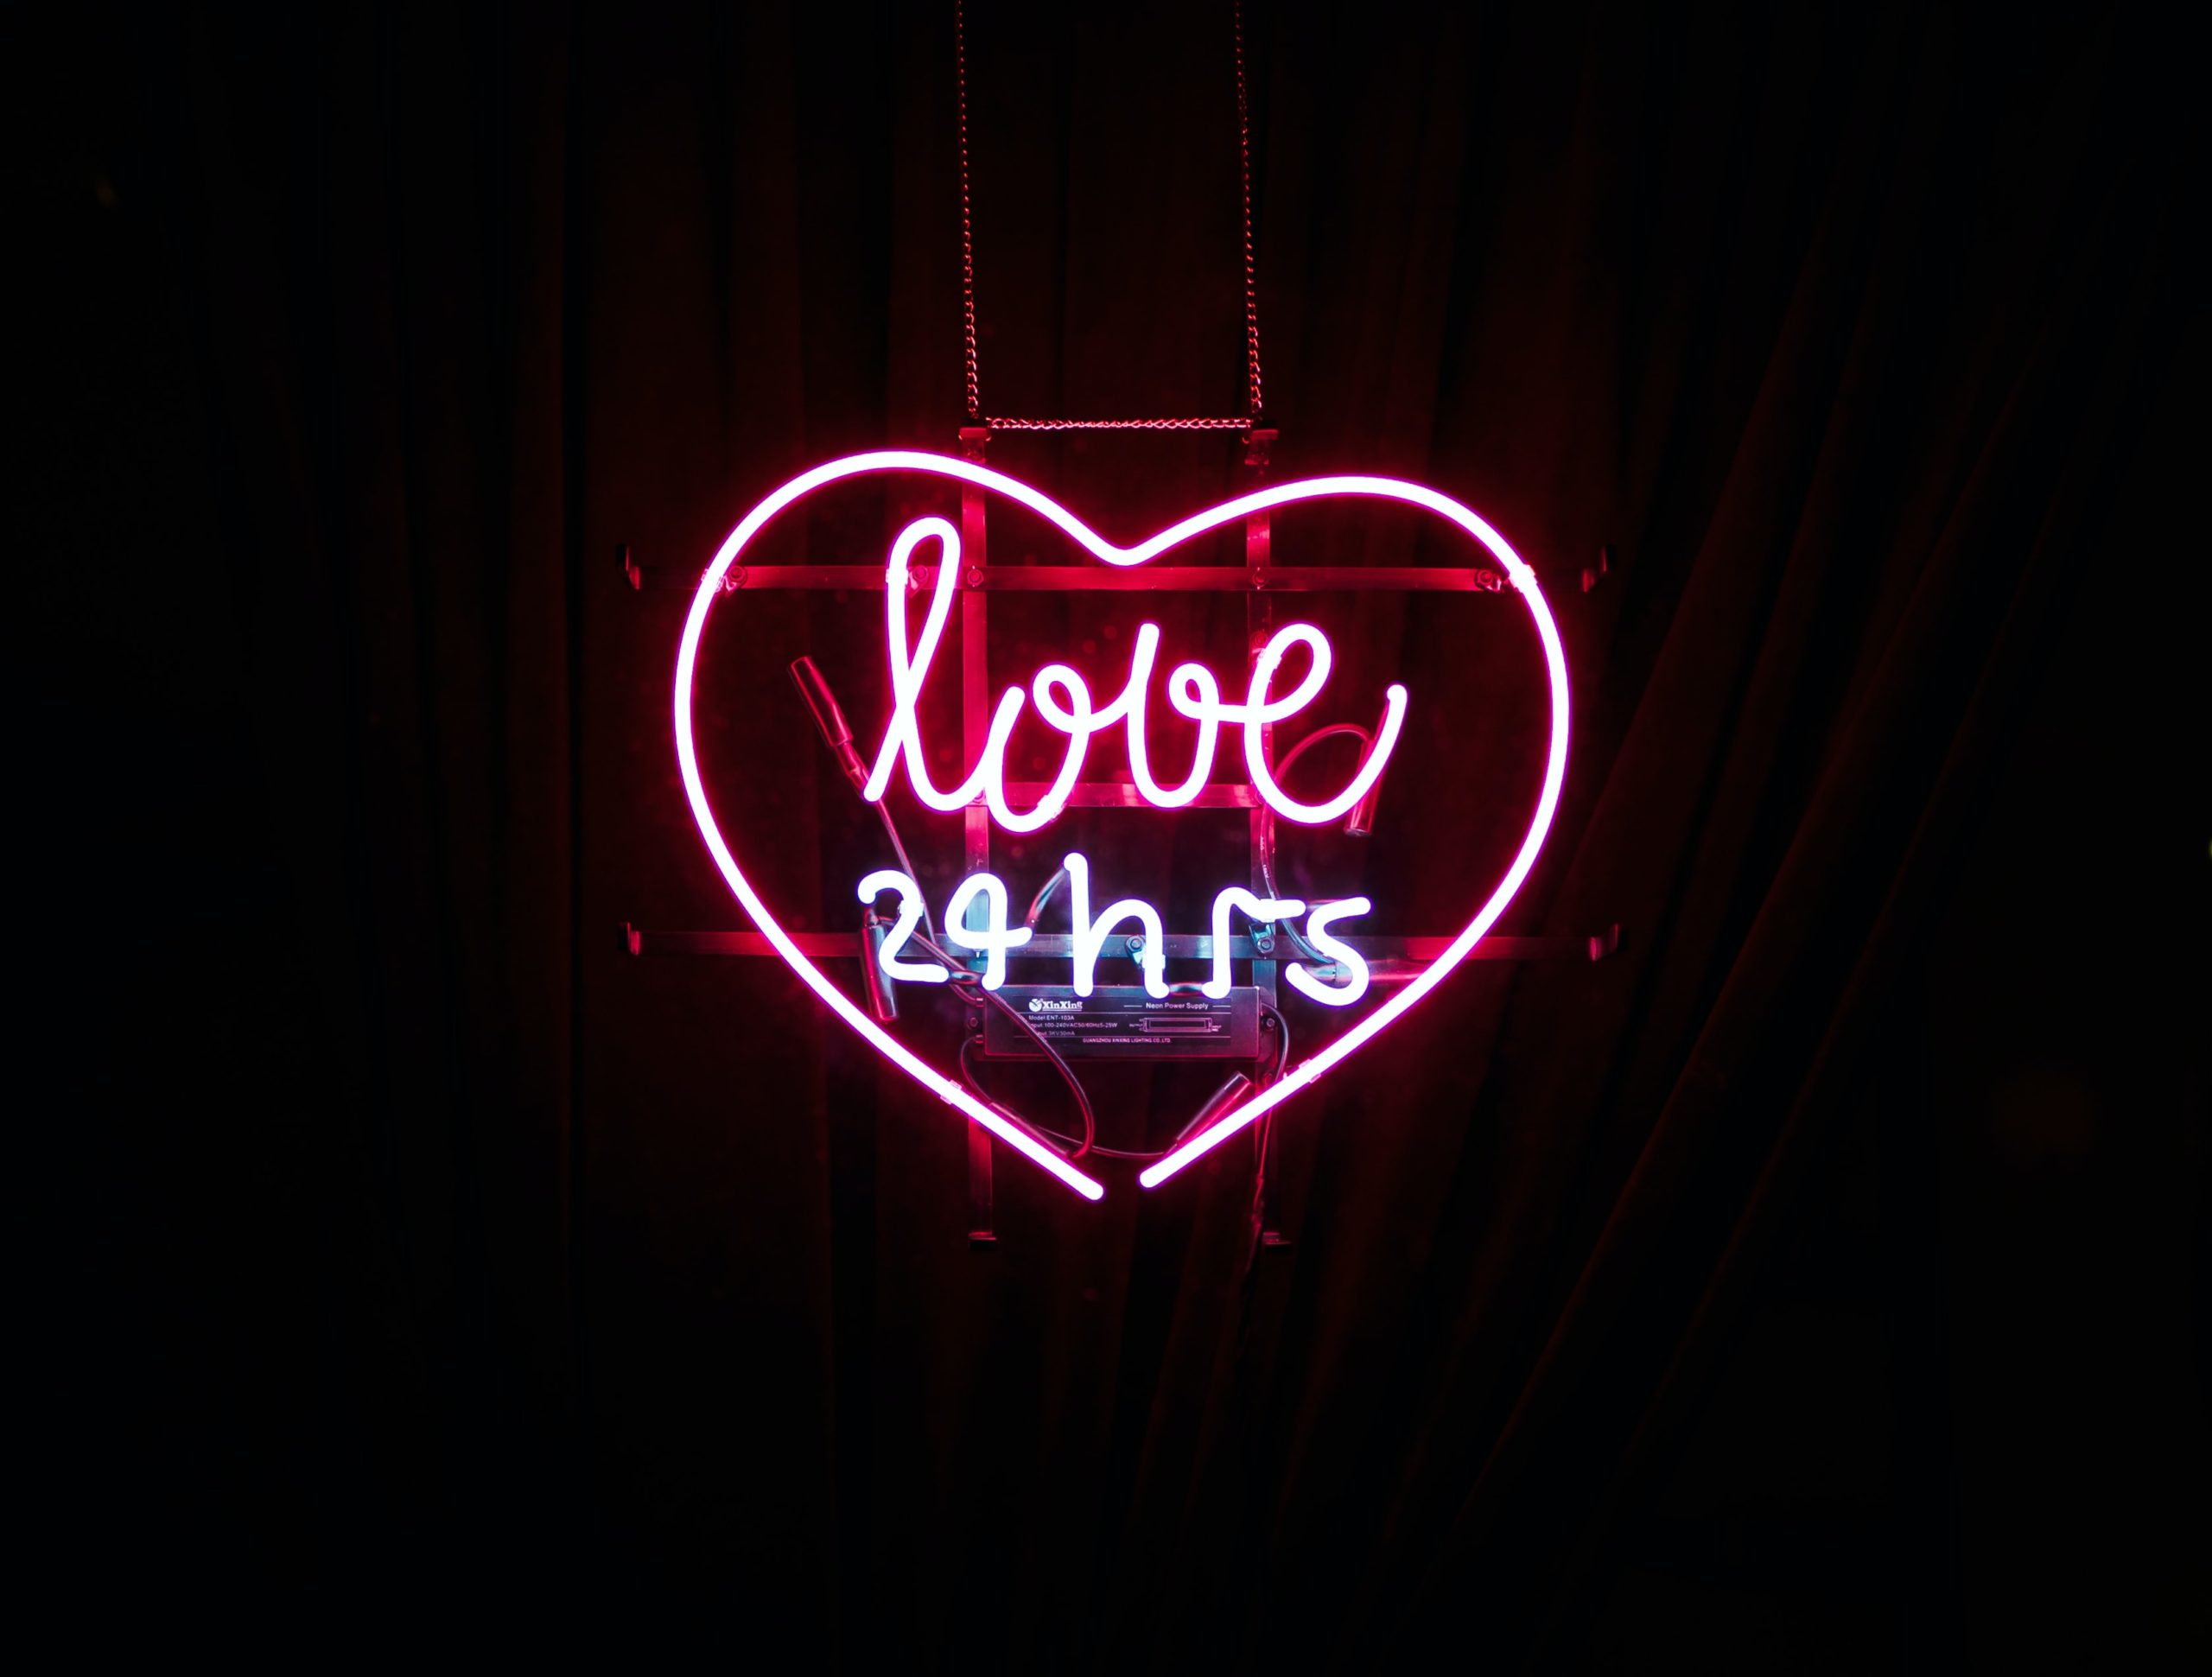 neon sign in the shape of a heart reading "love 24 hrs"